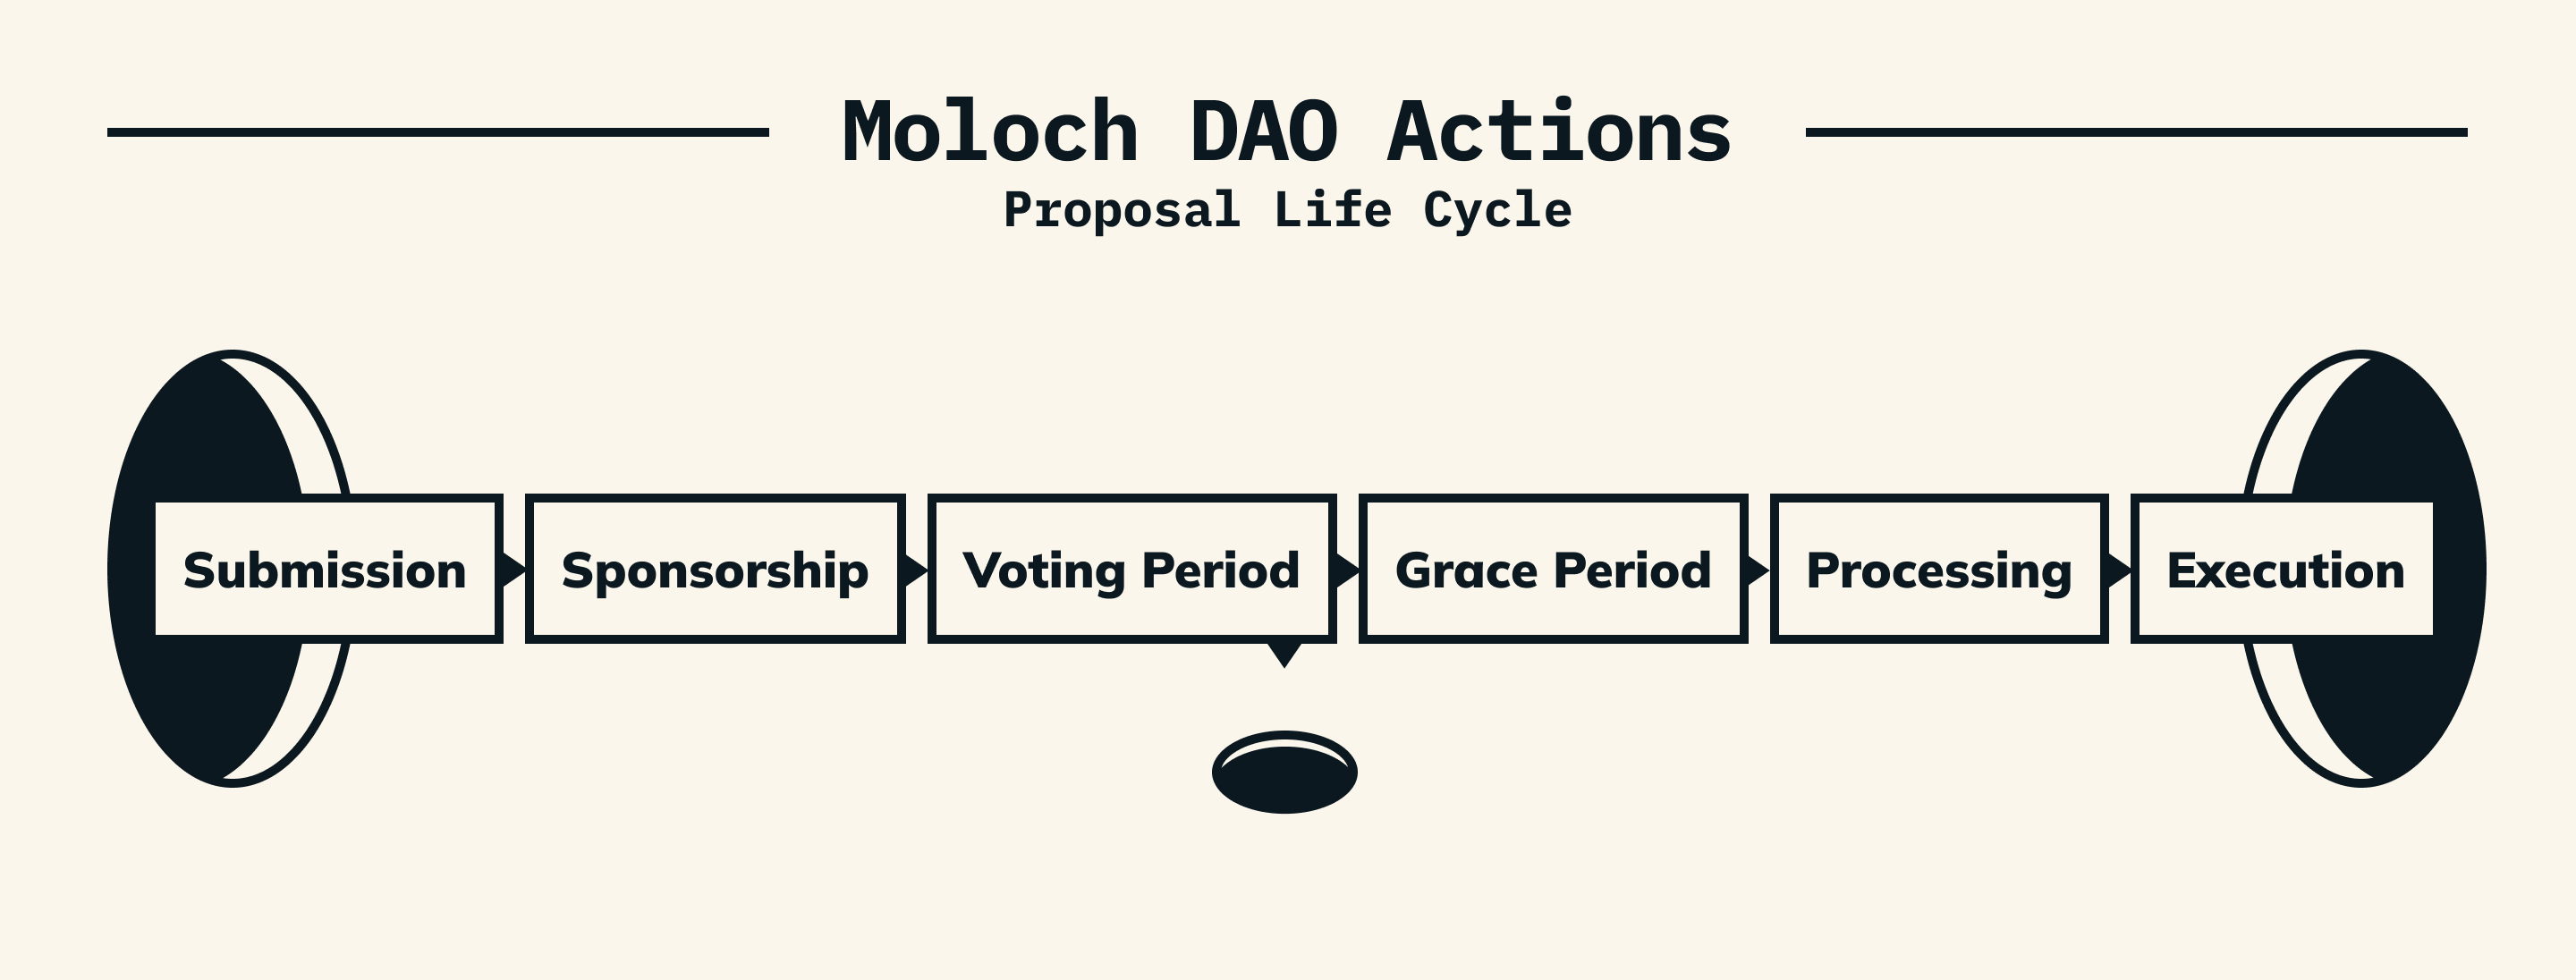 The life cycle of a proposal in a Moloch DAO